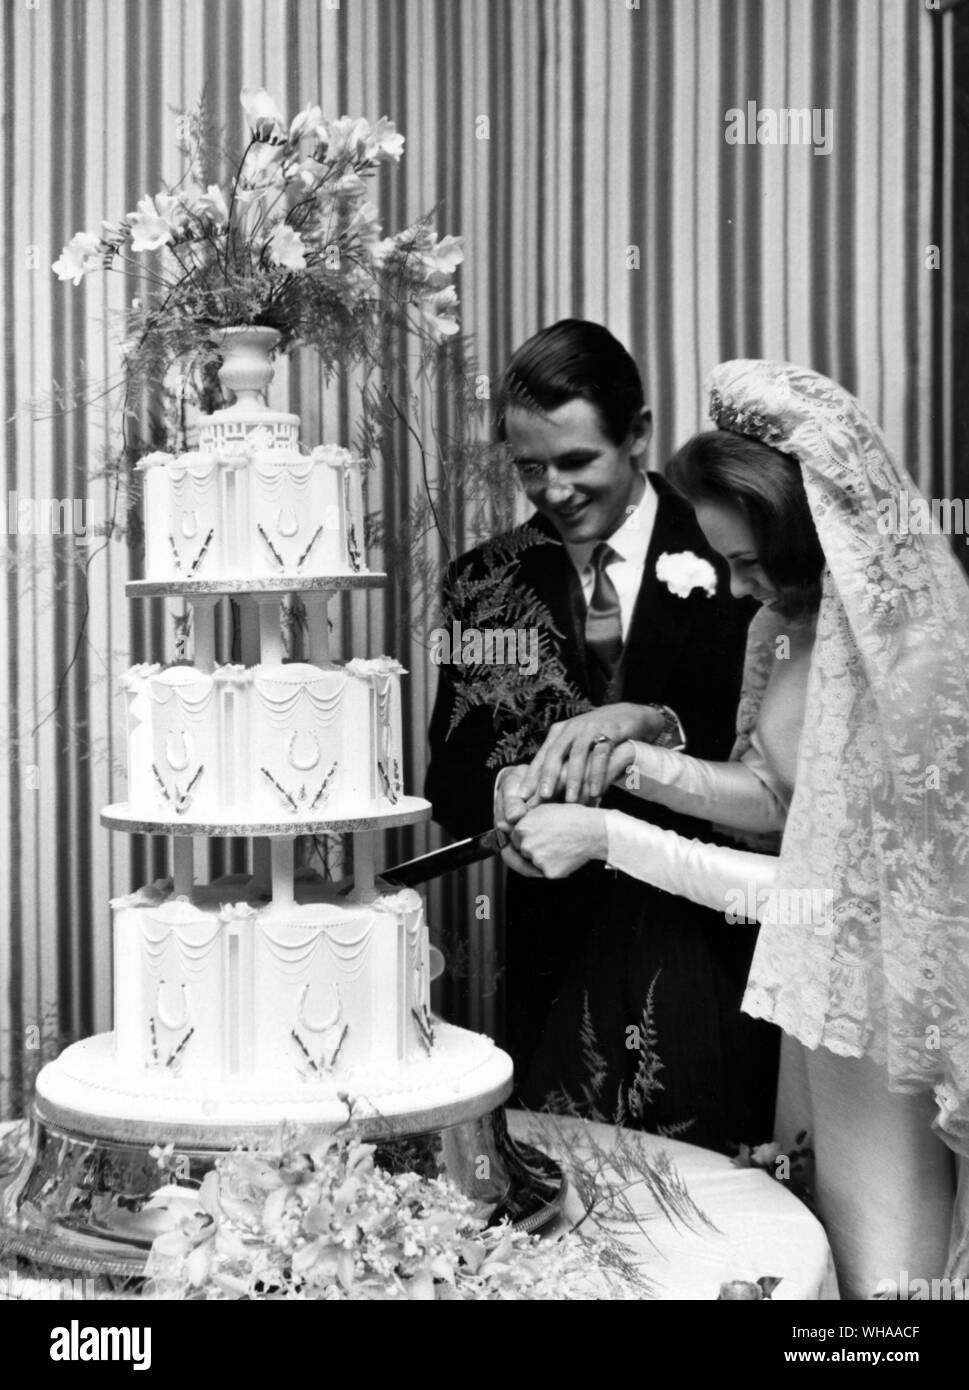 Bride and groom cutting the wedding cake. Stock Photo